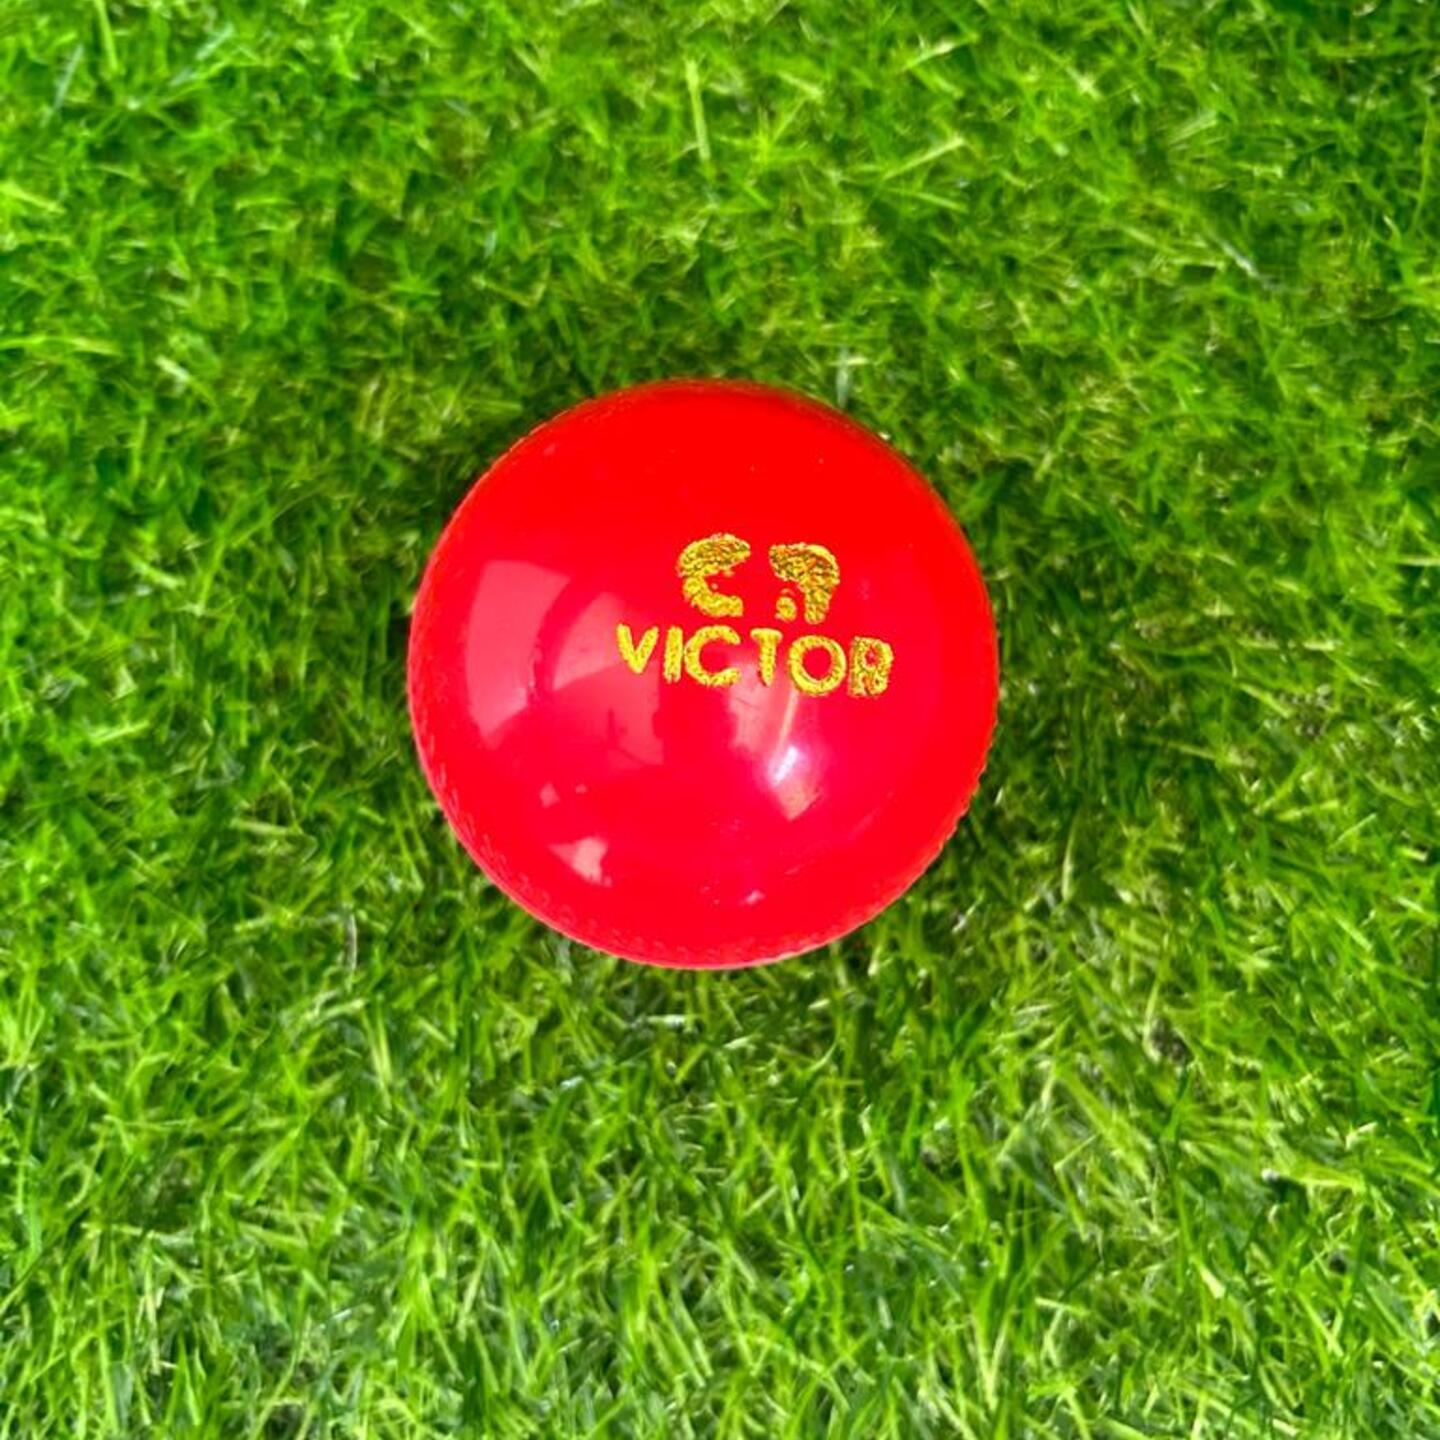 VICTOR SYNTHETIC CRICKET BALL | CRICKET PRACTICE